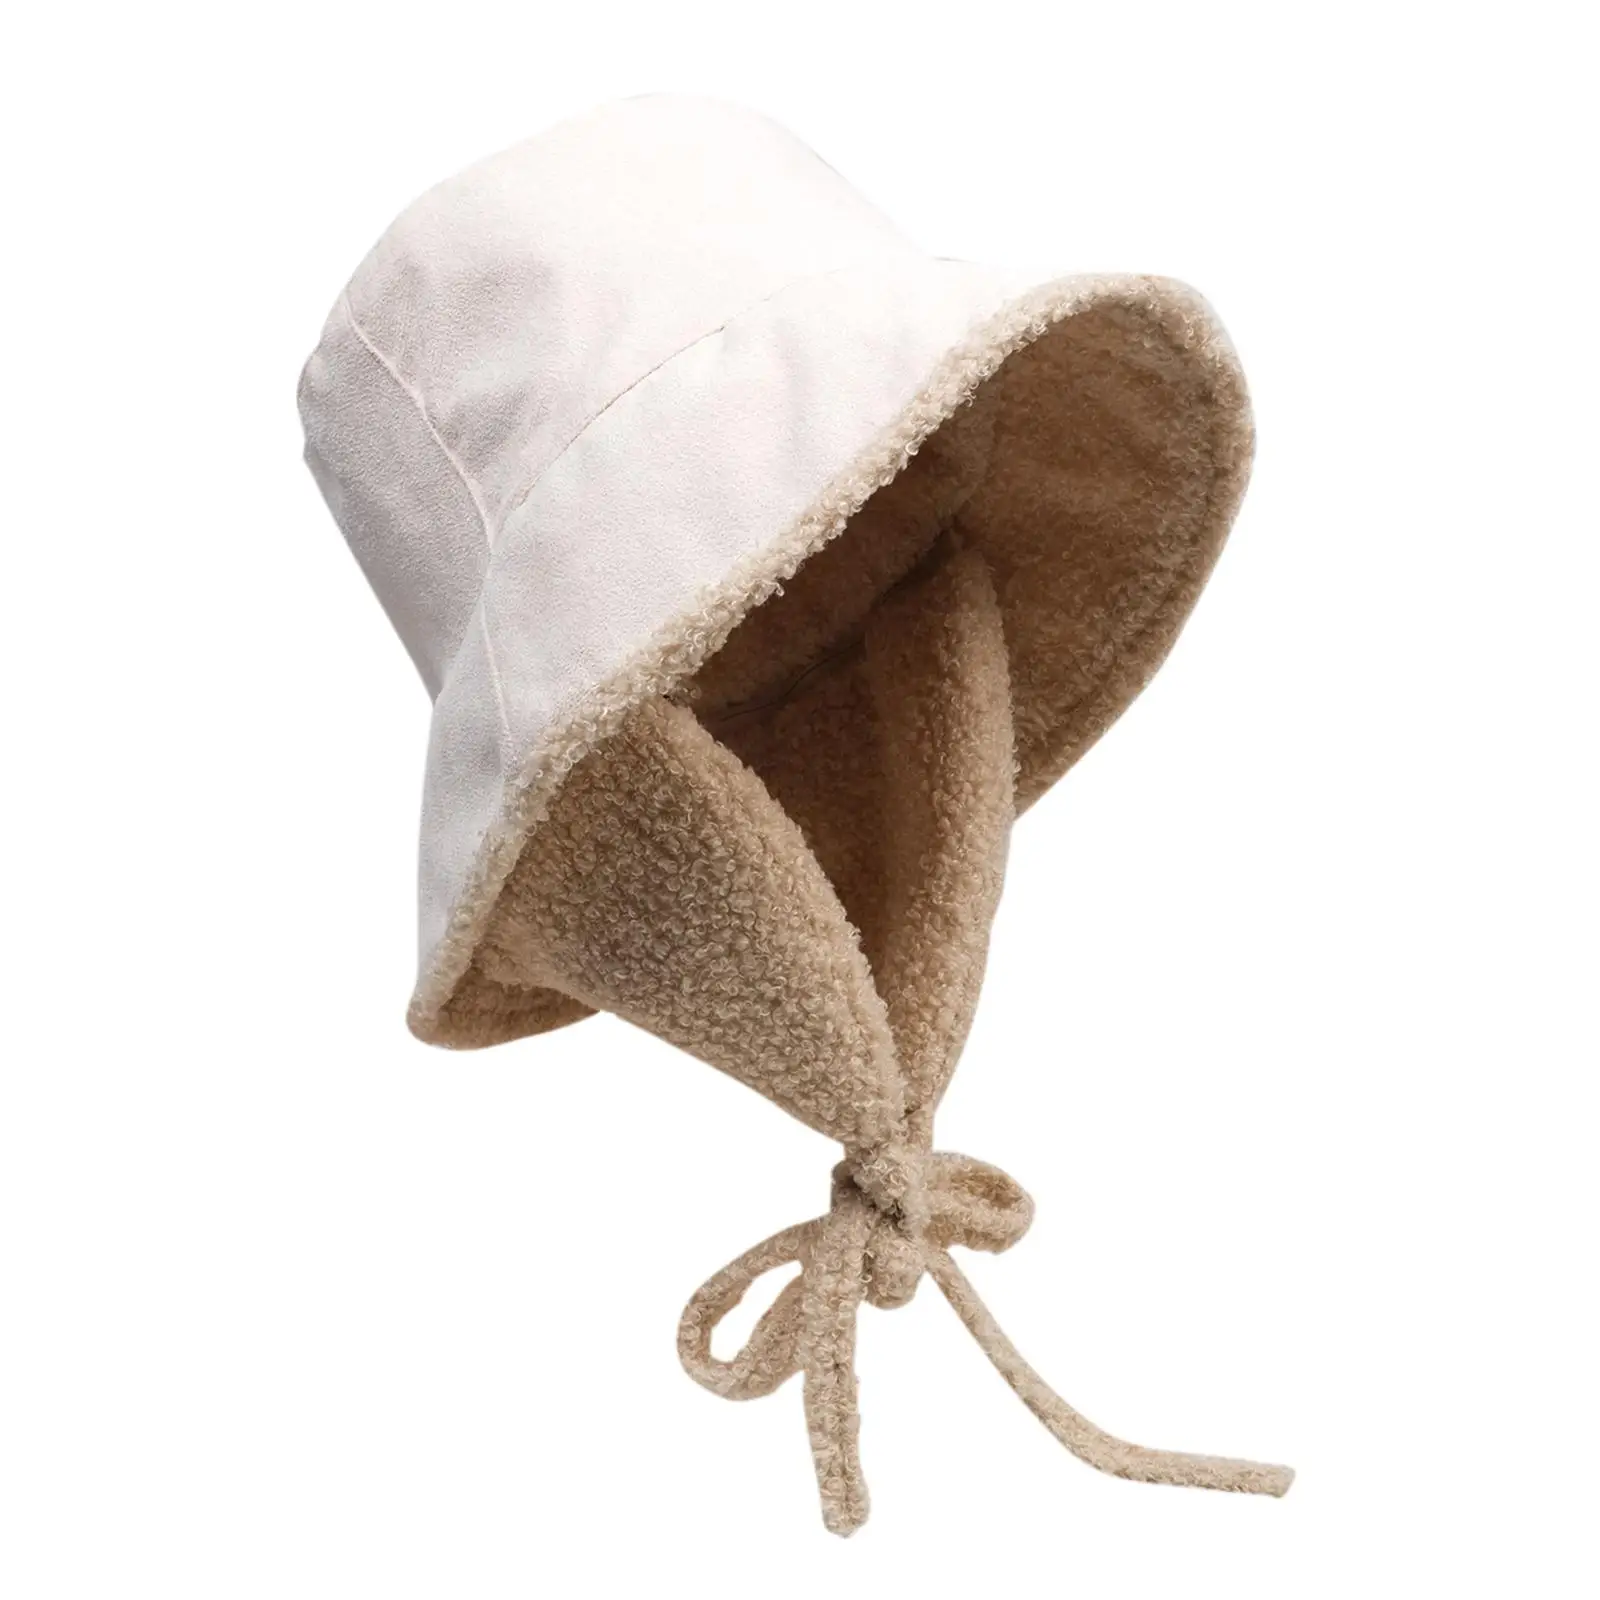 Warm Bucket Hat Casual with Ear Protector Fisherman Hat Furry Autumn Winter Hat for Boys Girls Camping Travel Hiking Outdoor